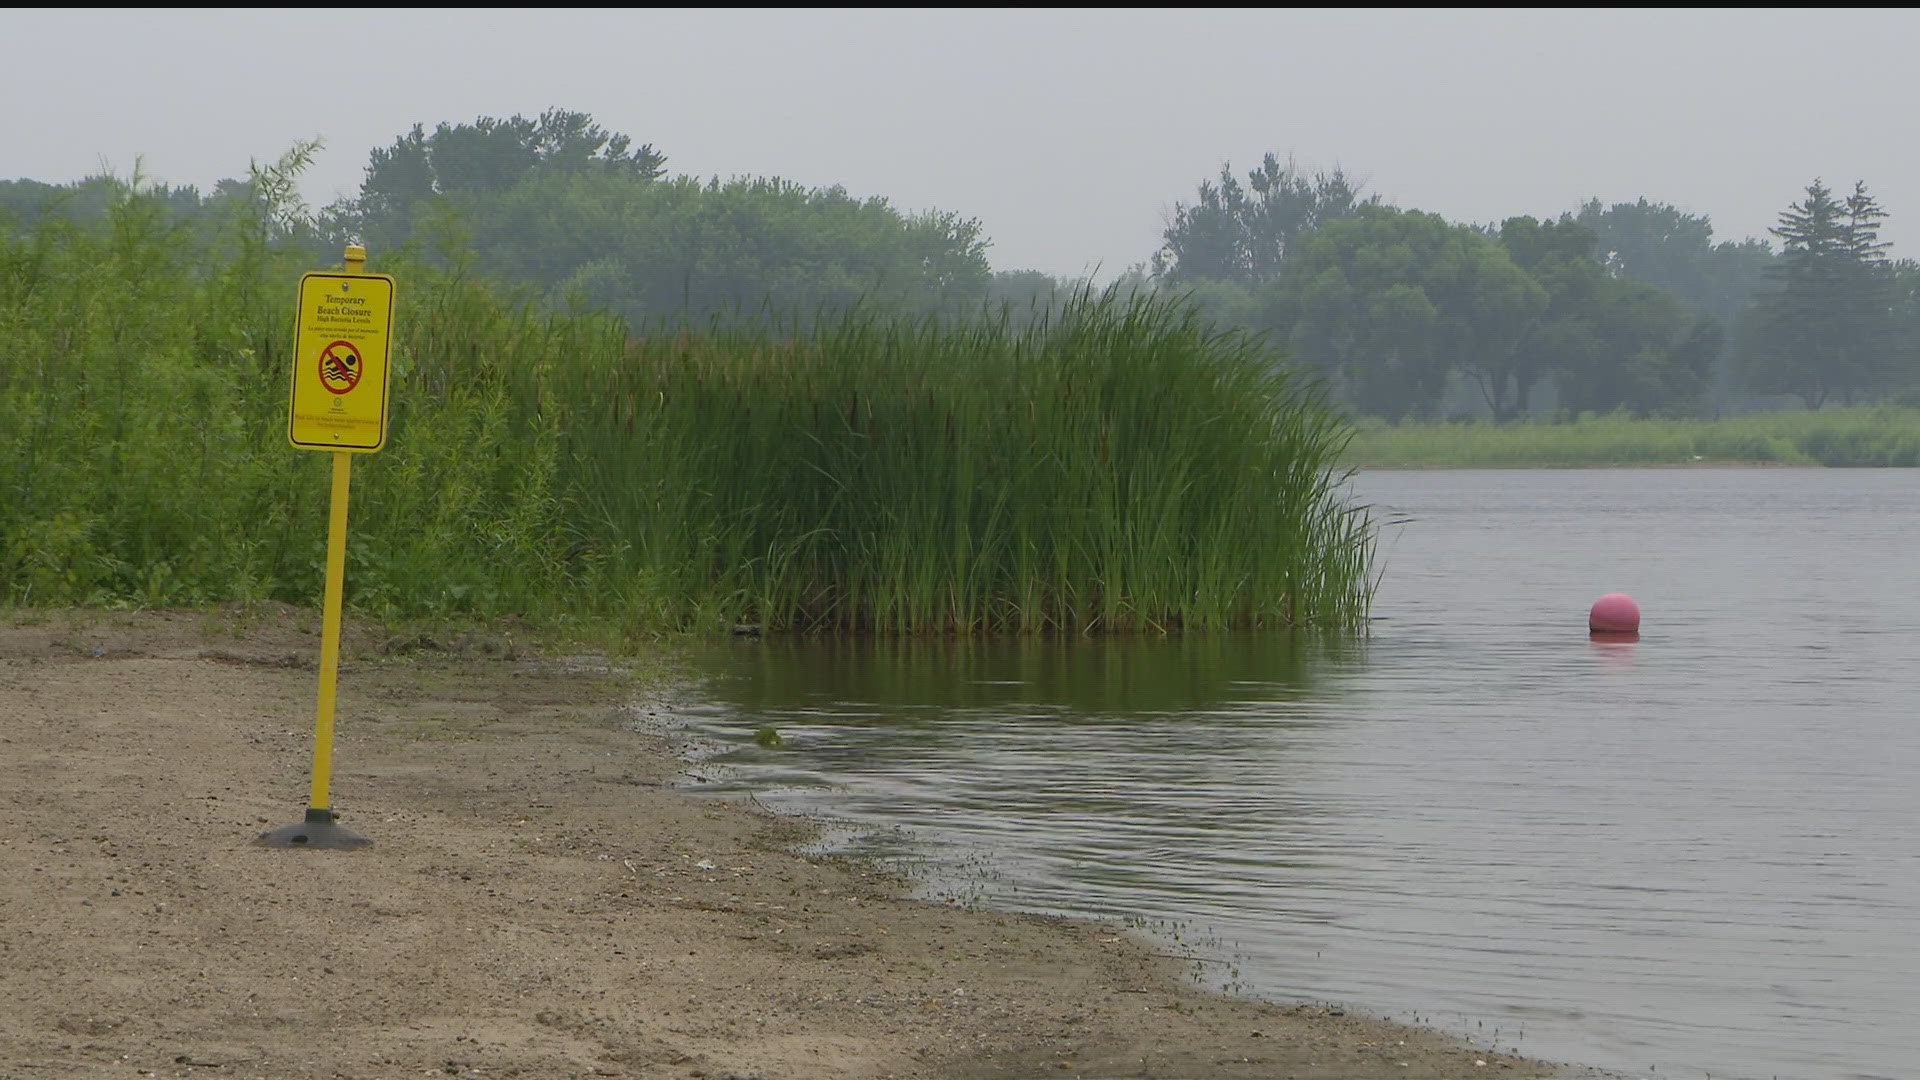 The Minneapolis Park and Recreation Board (MPRB) website shows both the Thomas and Lake Hiawatha beaches are temporarily shut down with high E. coli levels.